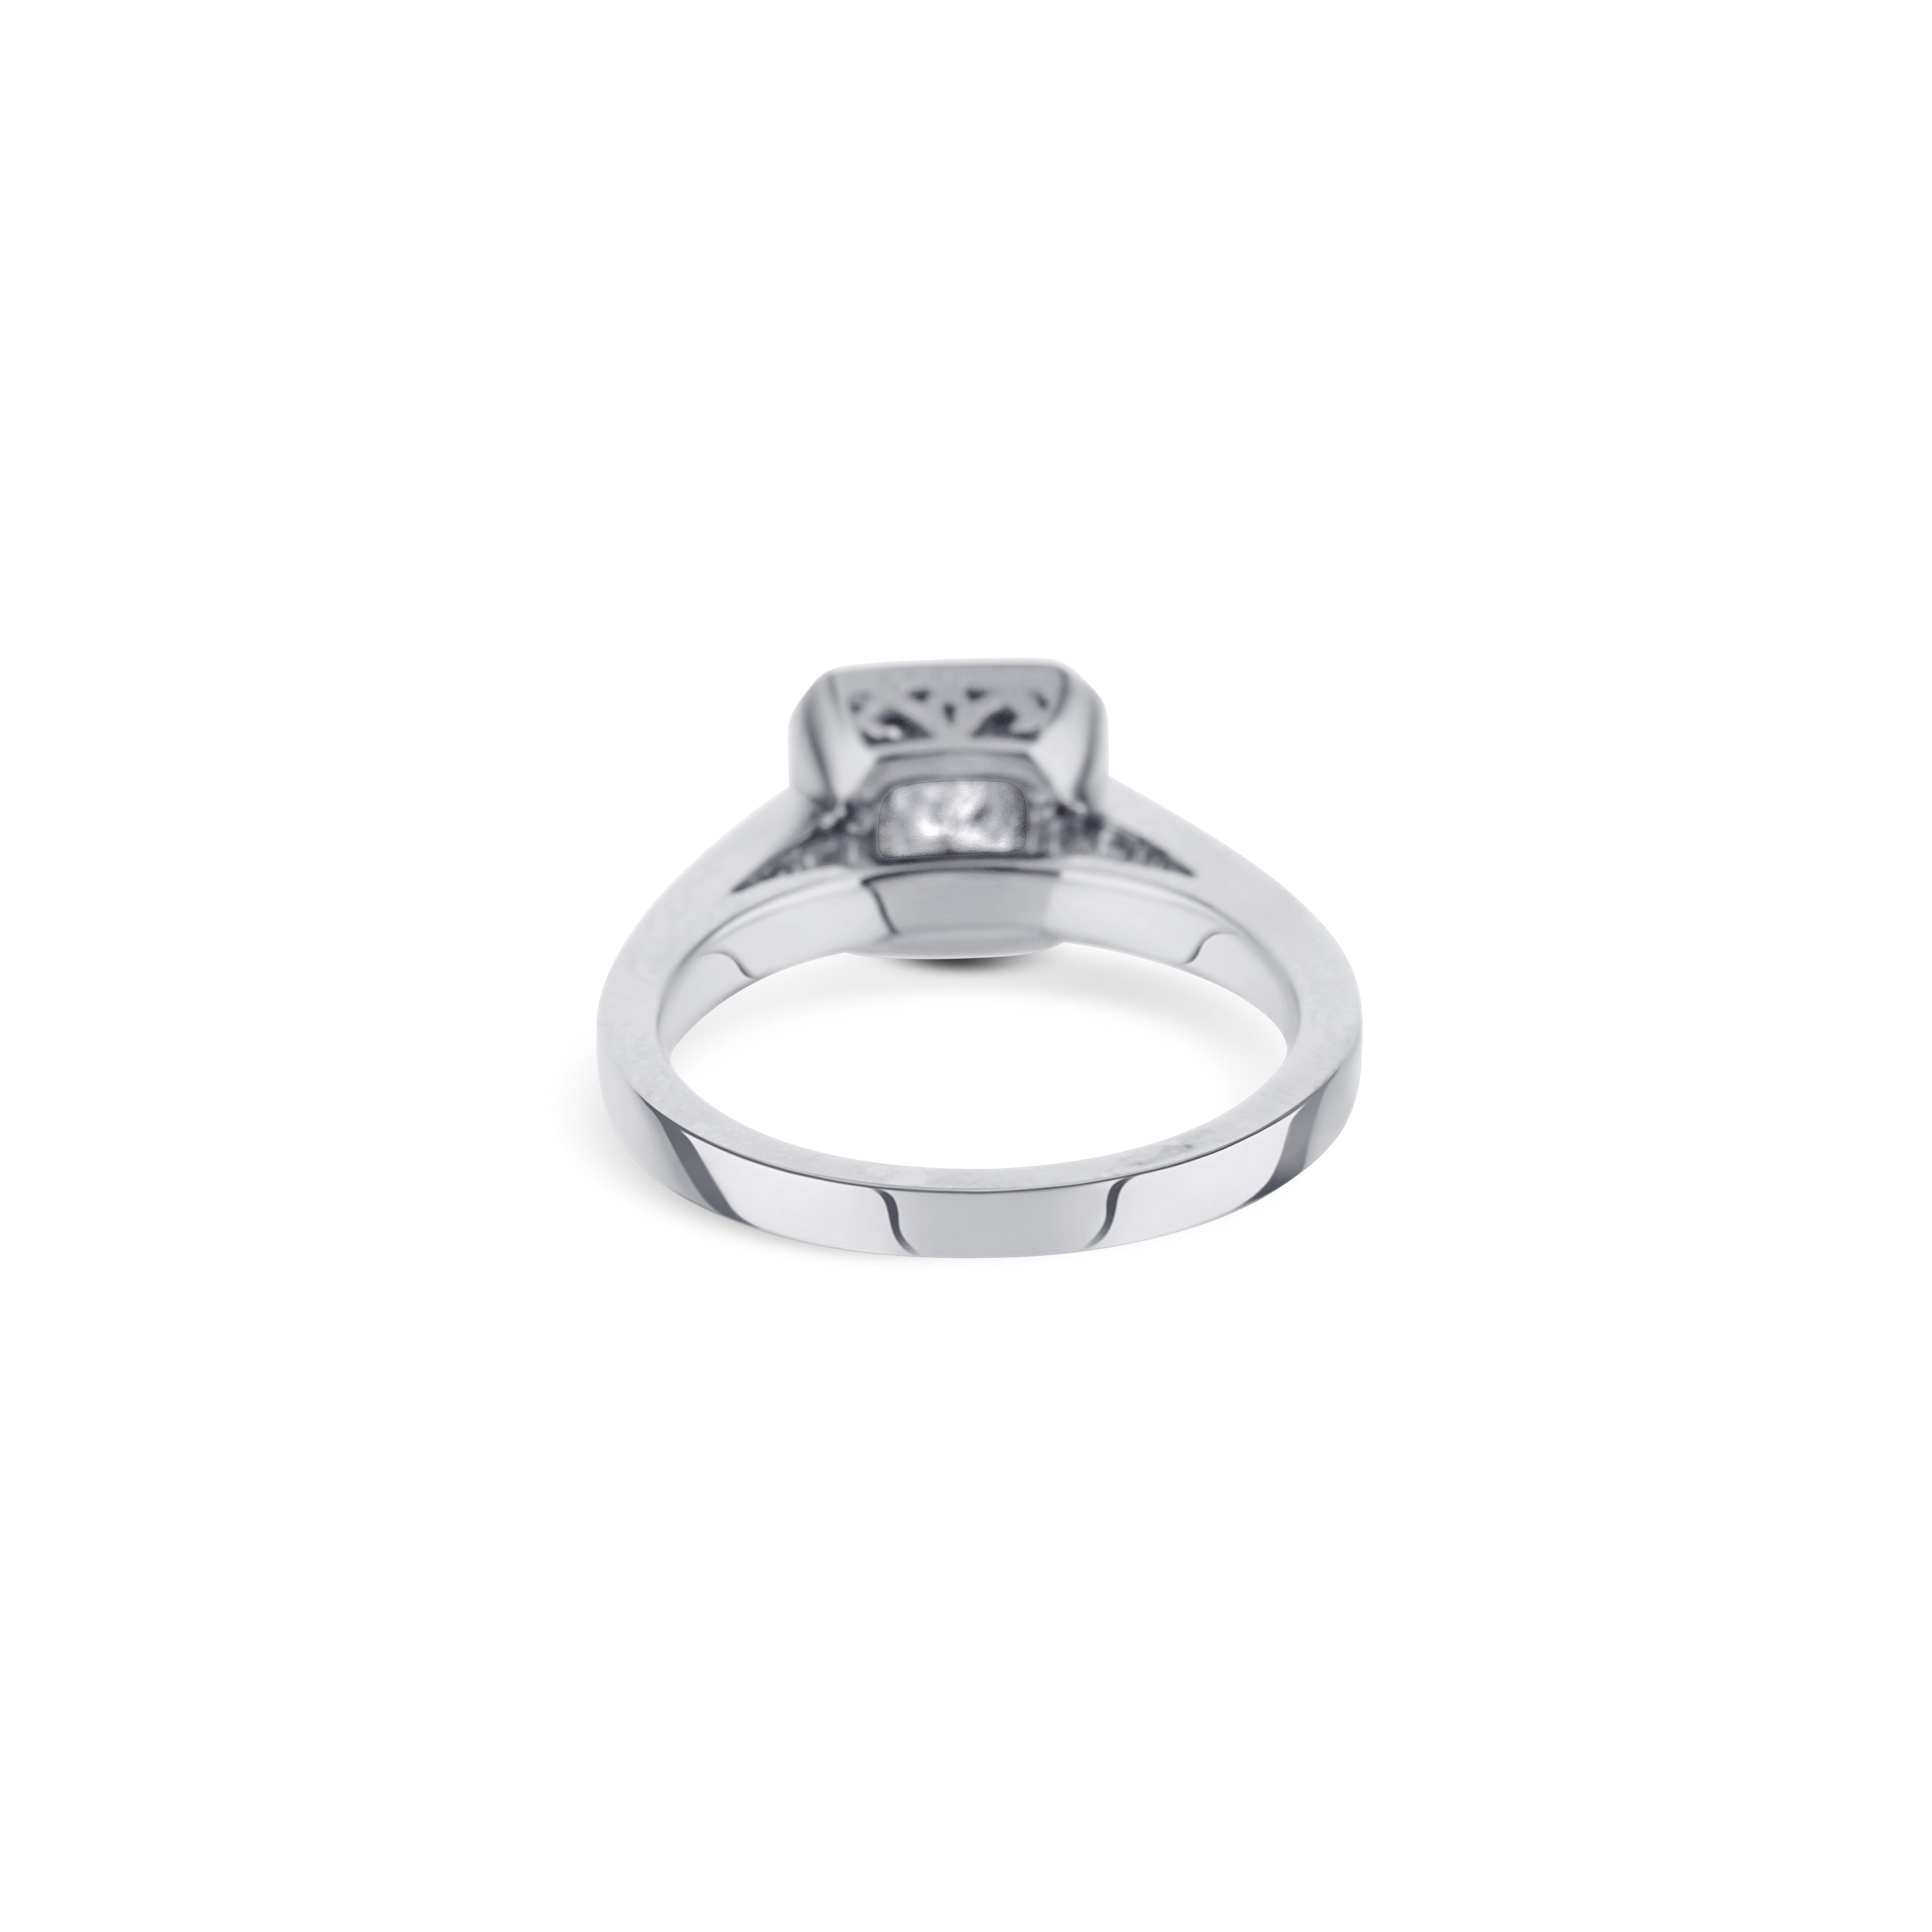 18K White Gold Ring With Princess Cut Diamond And Halo